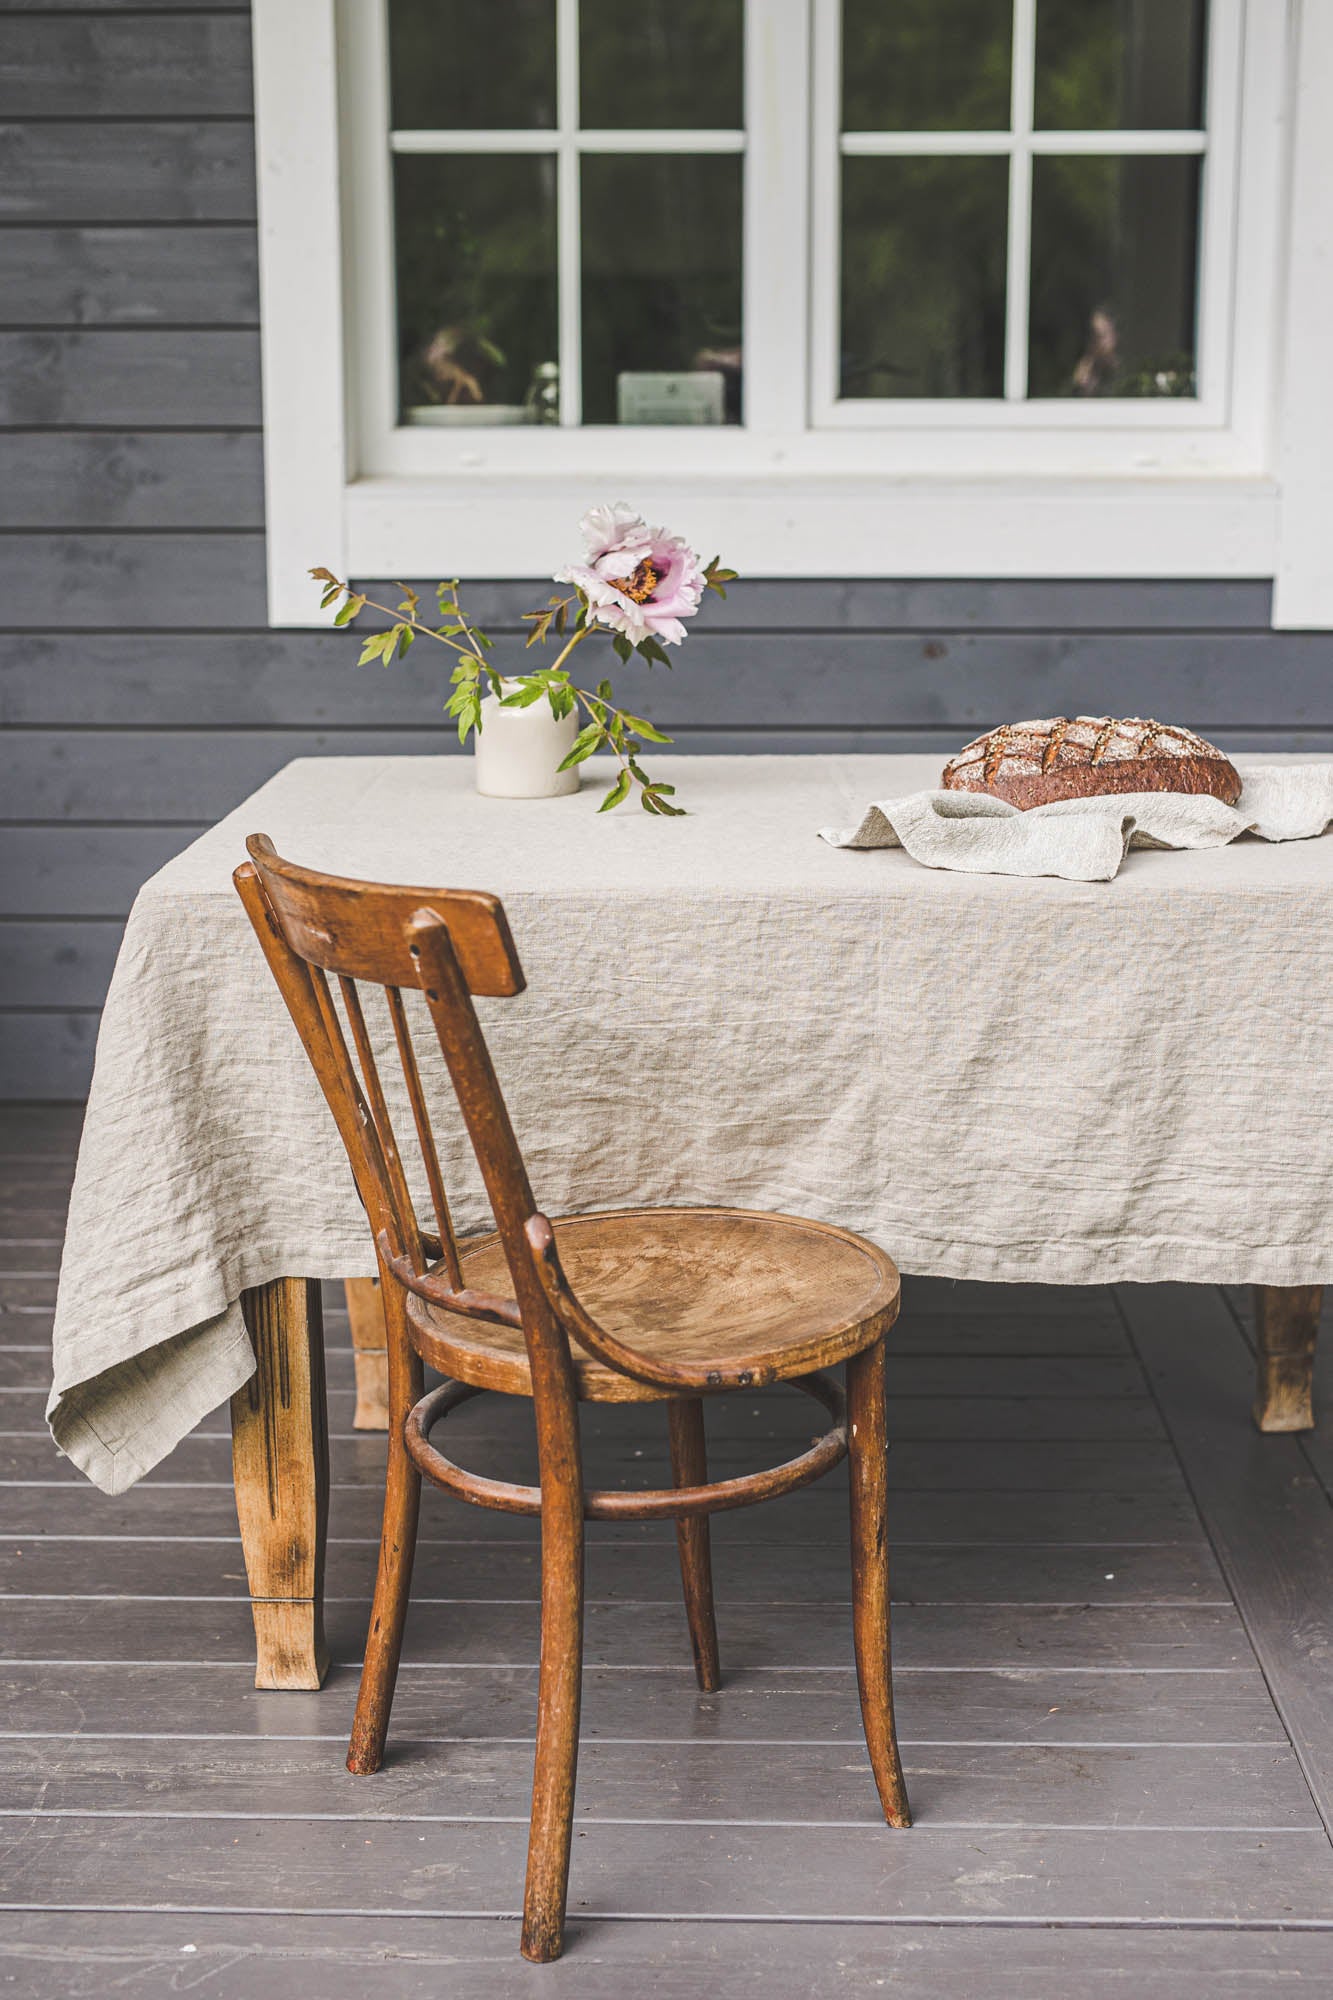 Natural linen tablecloth with mitered corners